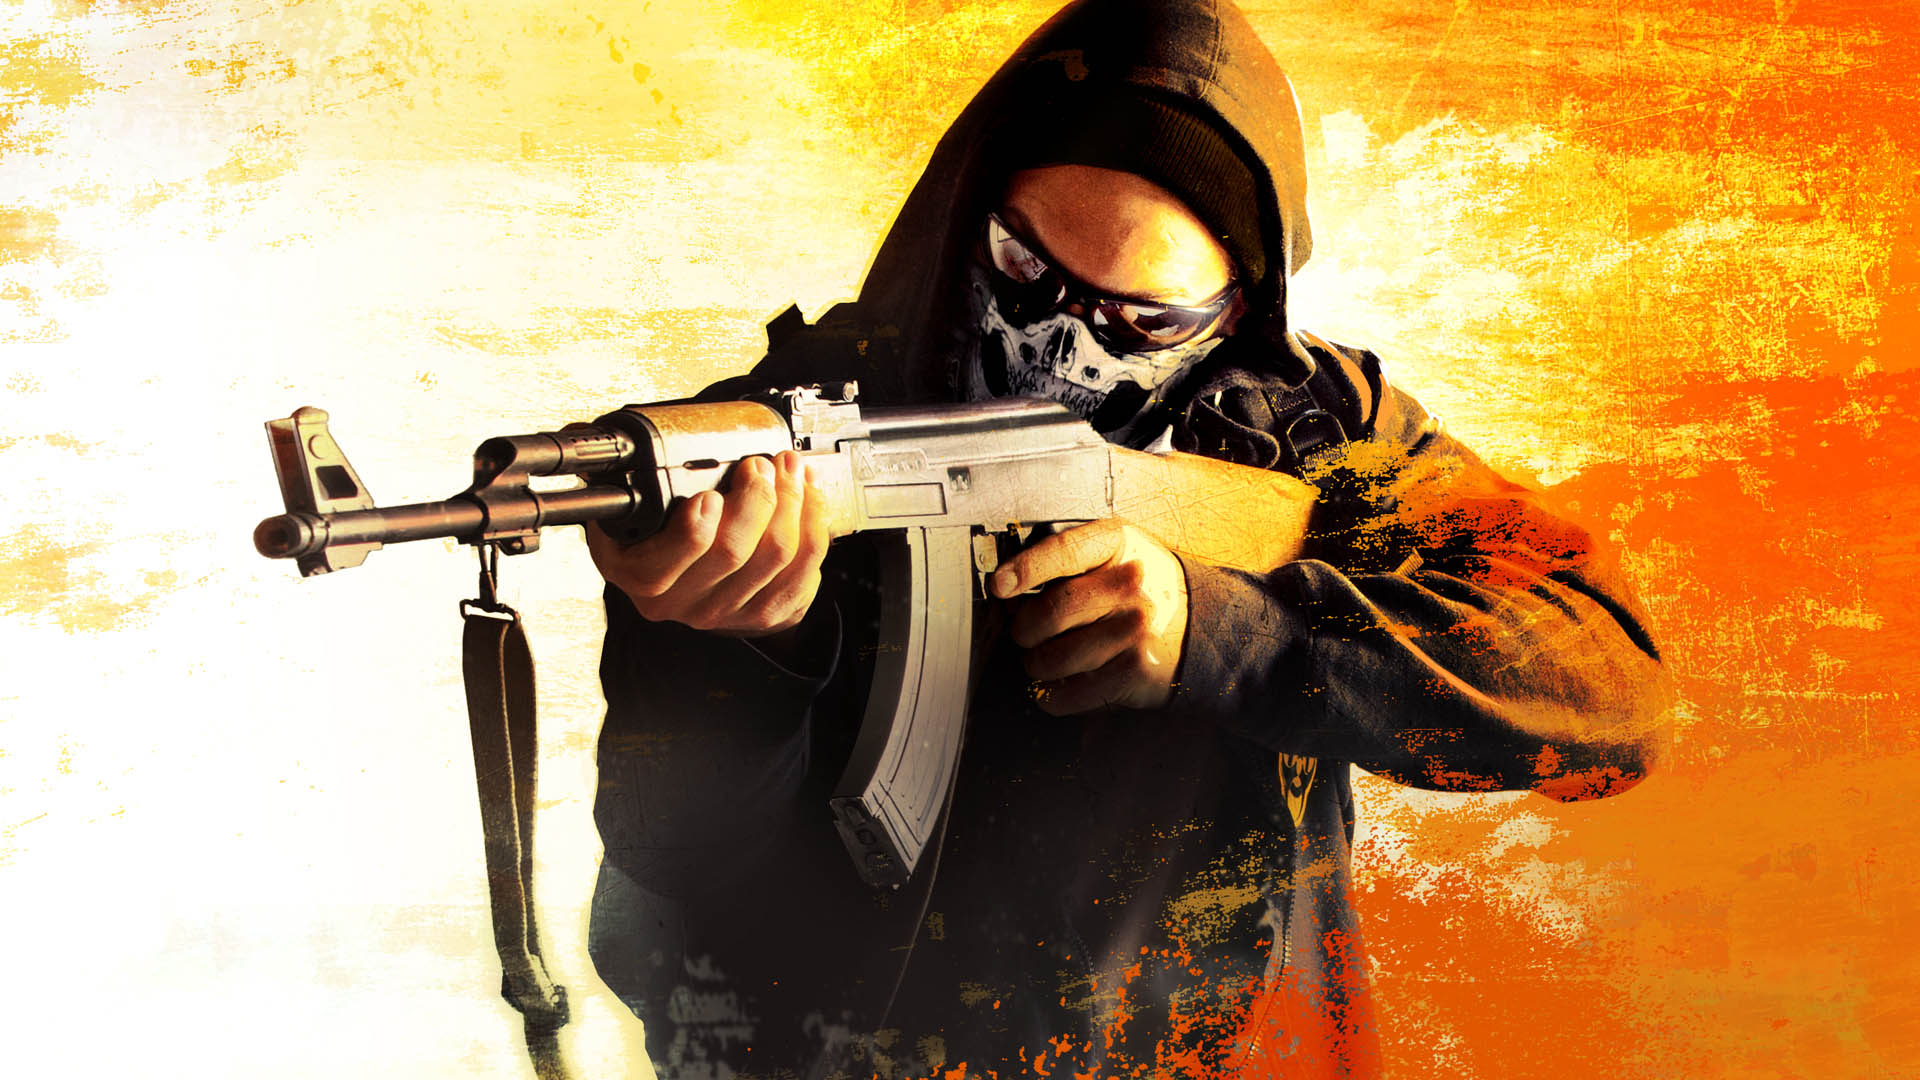 cs game free download for mobile